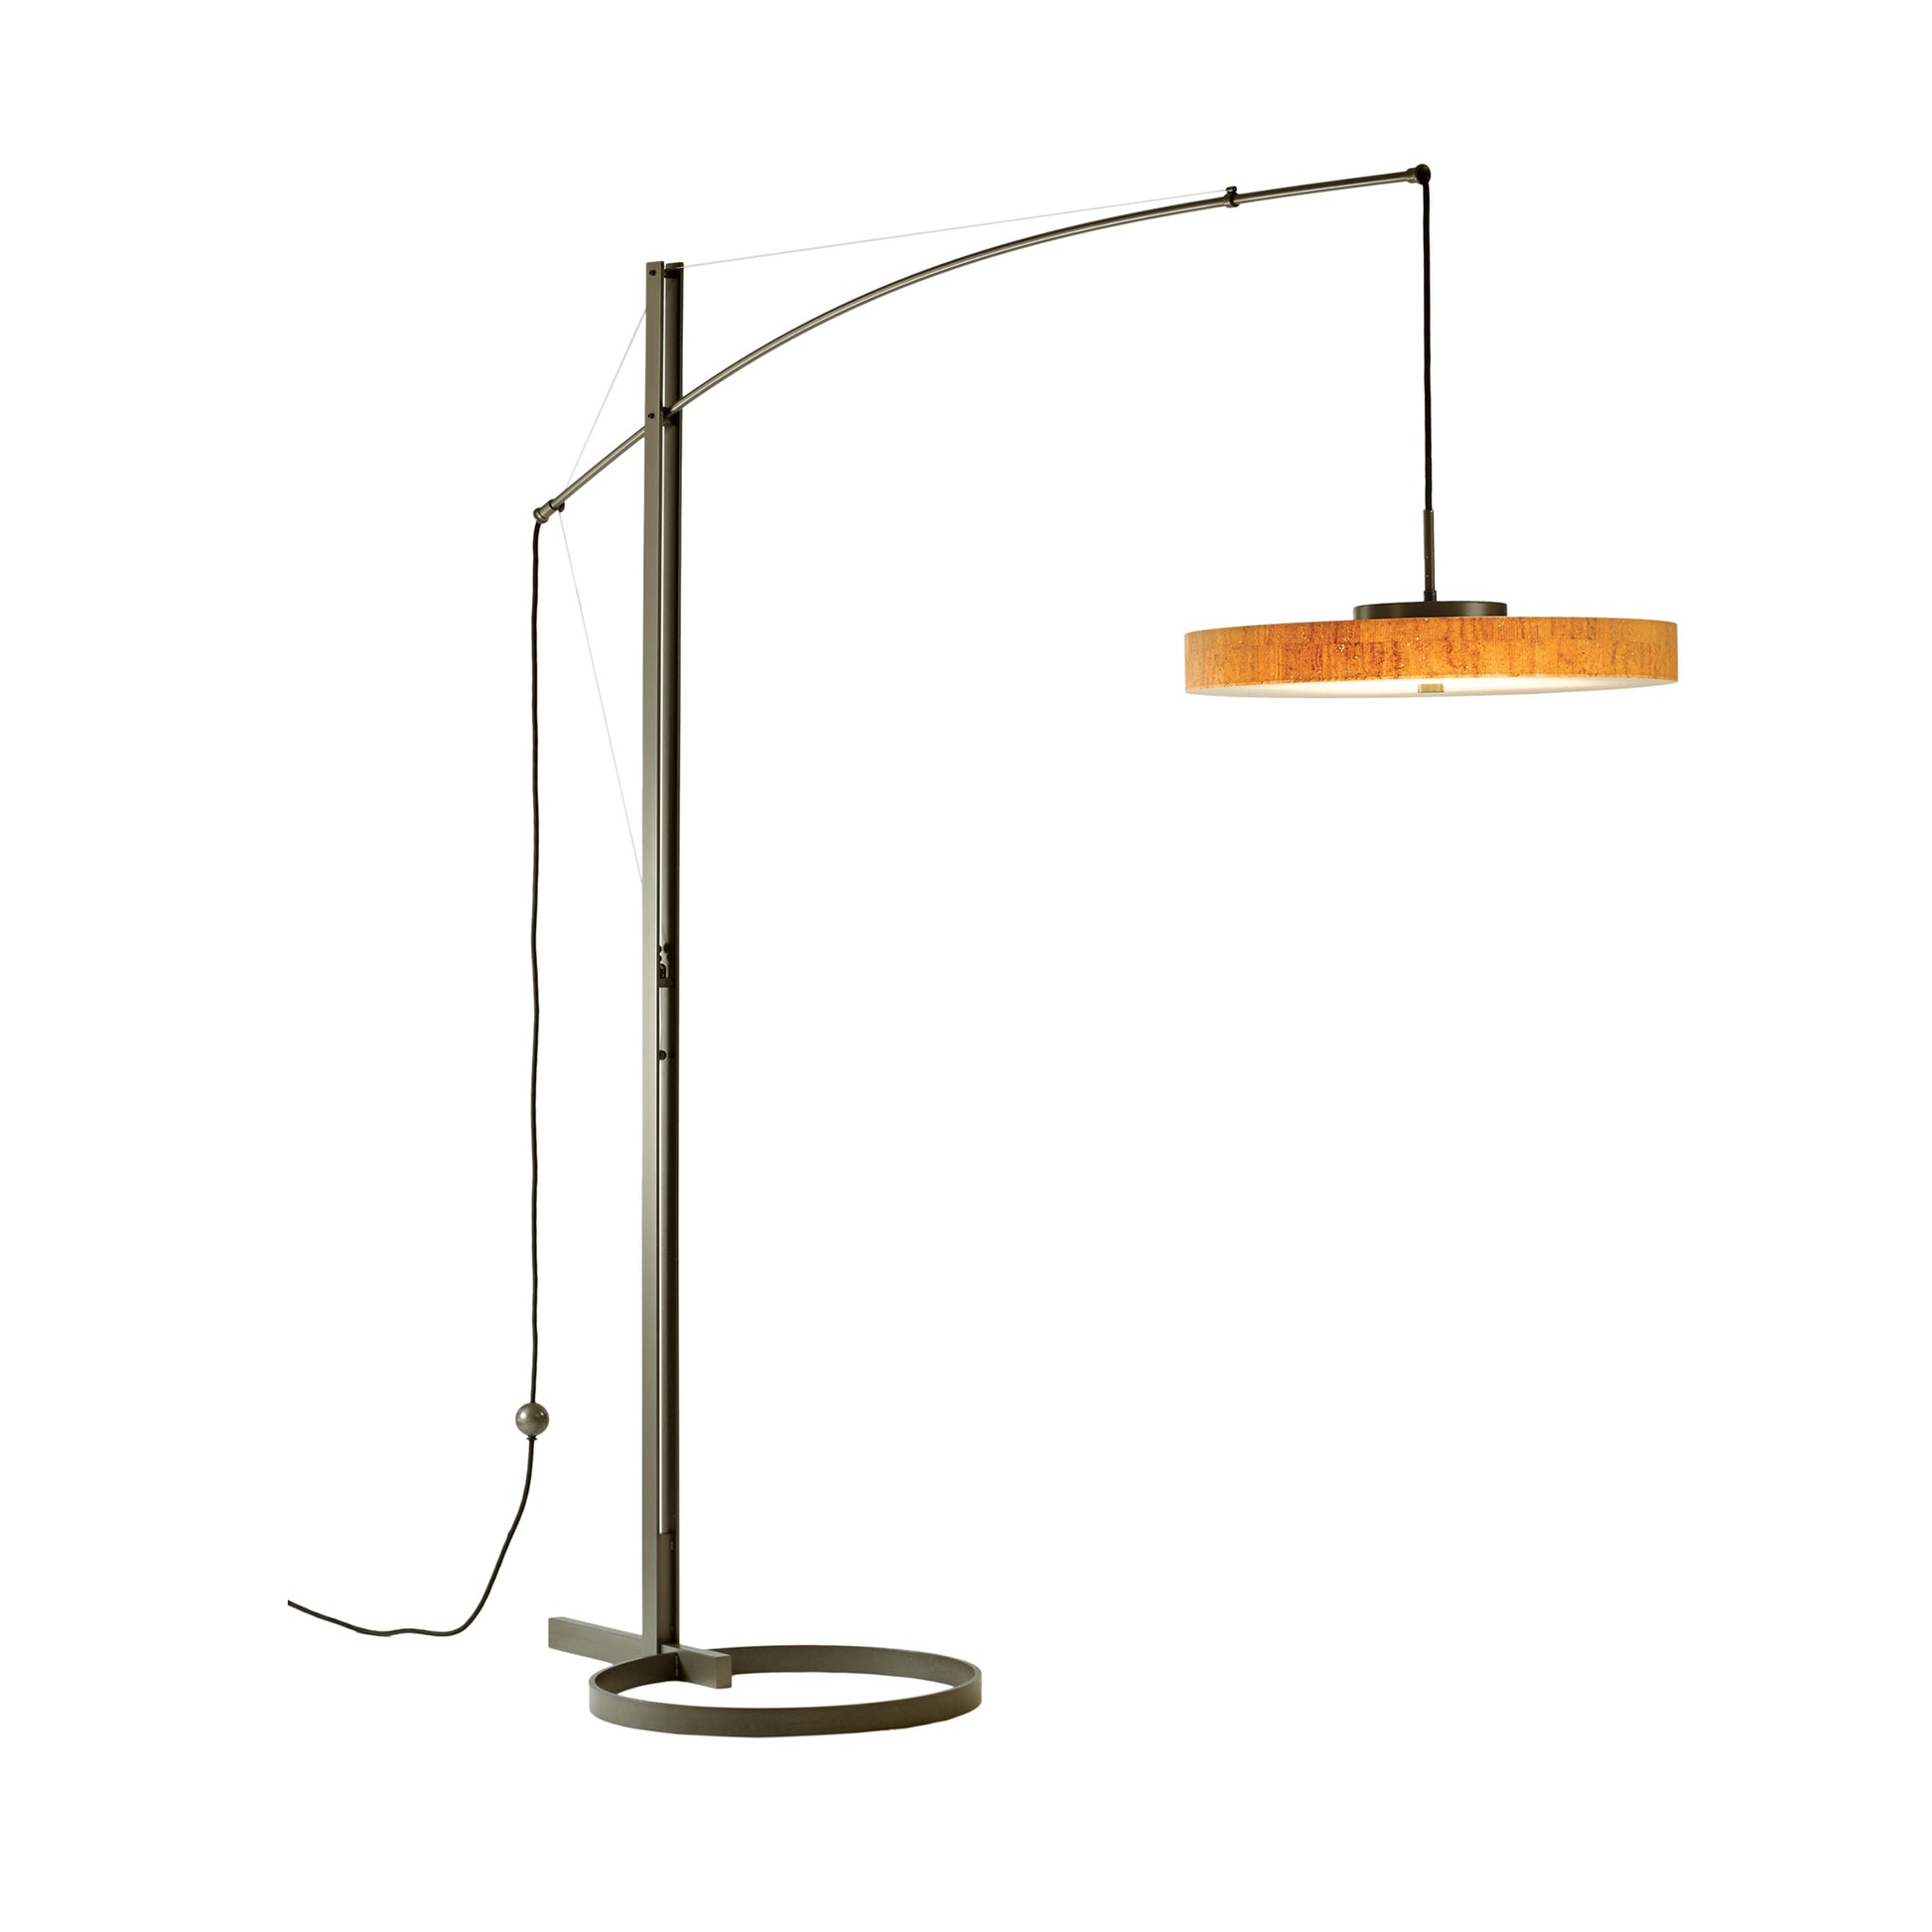 Hubbardton Forge's Disq Arc Floor Lamp, a handcrafted lighting innovation, combines a modern floor lamp with a wooden shade.